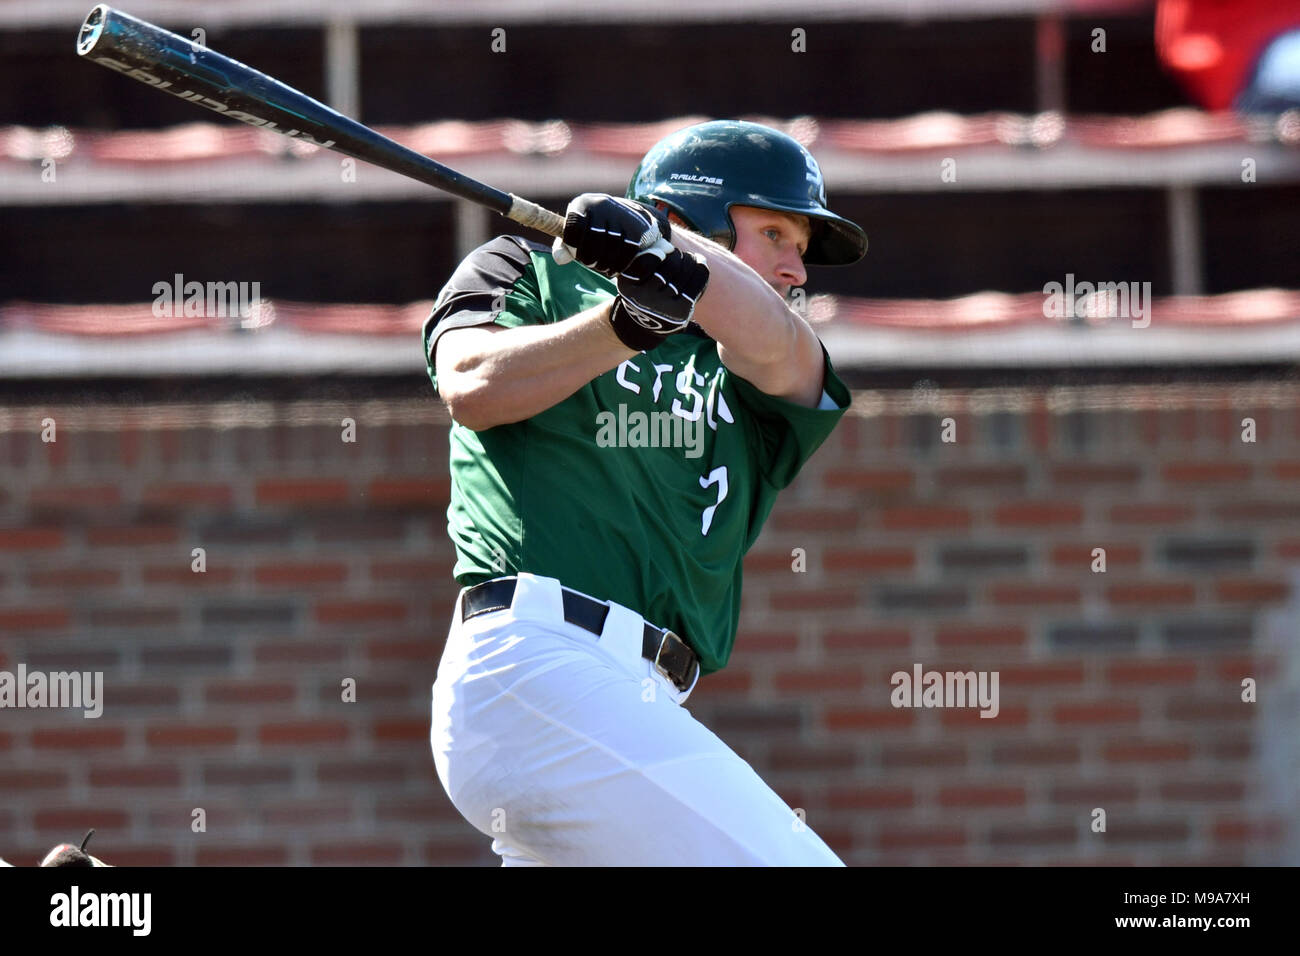 College Park, Maryland, USA. 23rd Mar, 2018. Stetson outfielder ANDREW MACNEIL (7) follows through on a swing during the NCAA baseball game played in College Park, MD. MACNEIL drove in 3 in the 12-3 Hatters win over the Terrapins. Credit: Ken Inness/ZUMA Wire/Alamy Live News Stock Photo